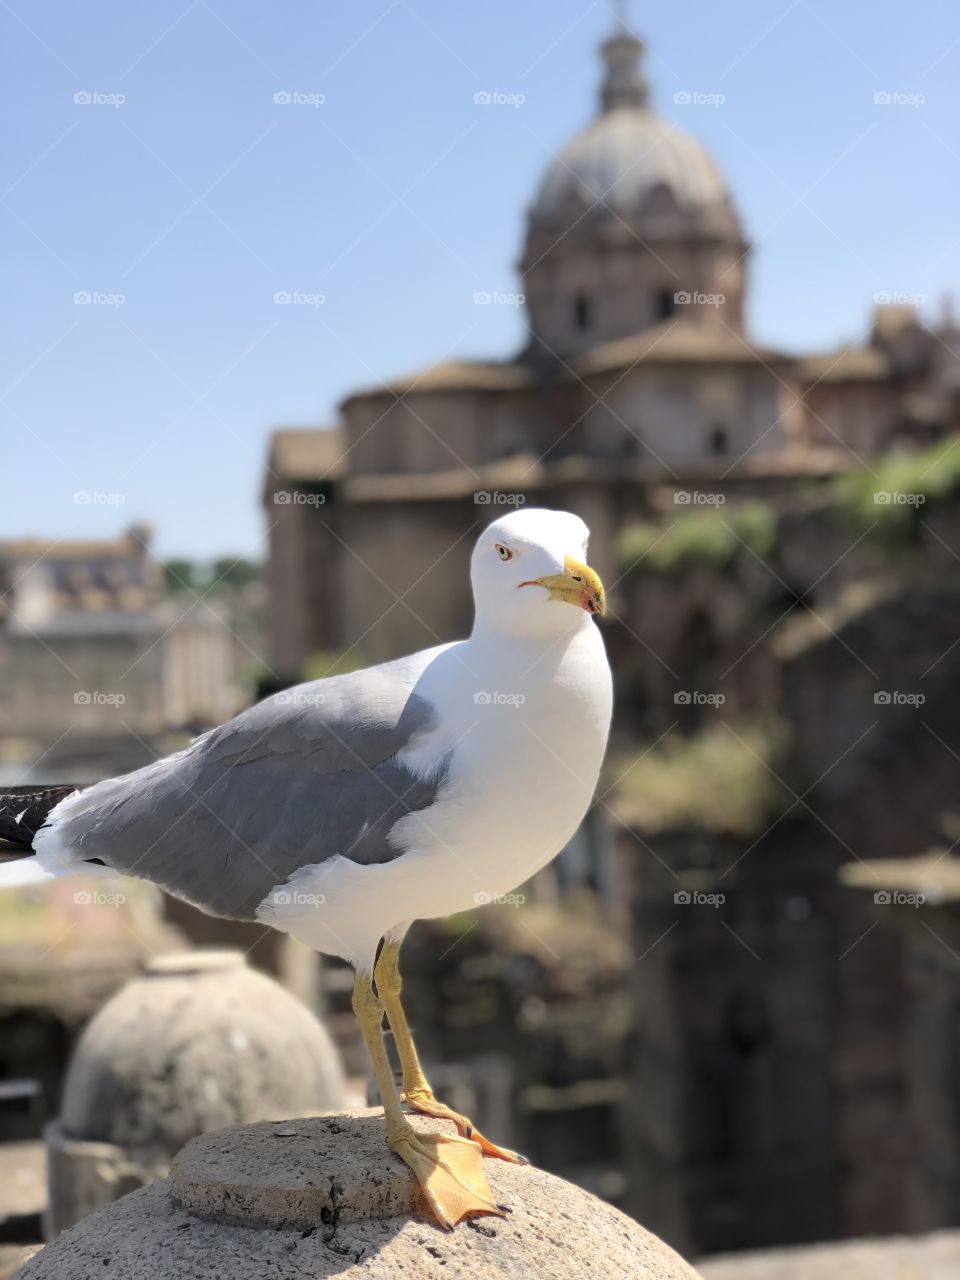 A watchful eye on Imperial Rome